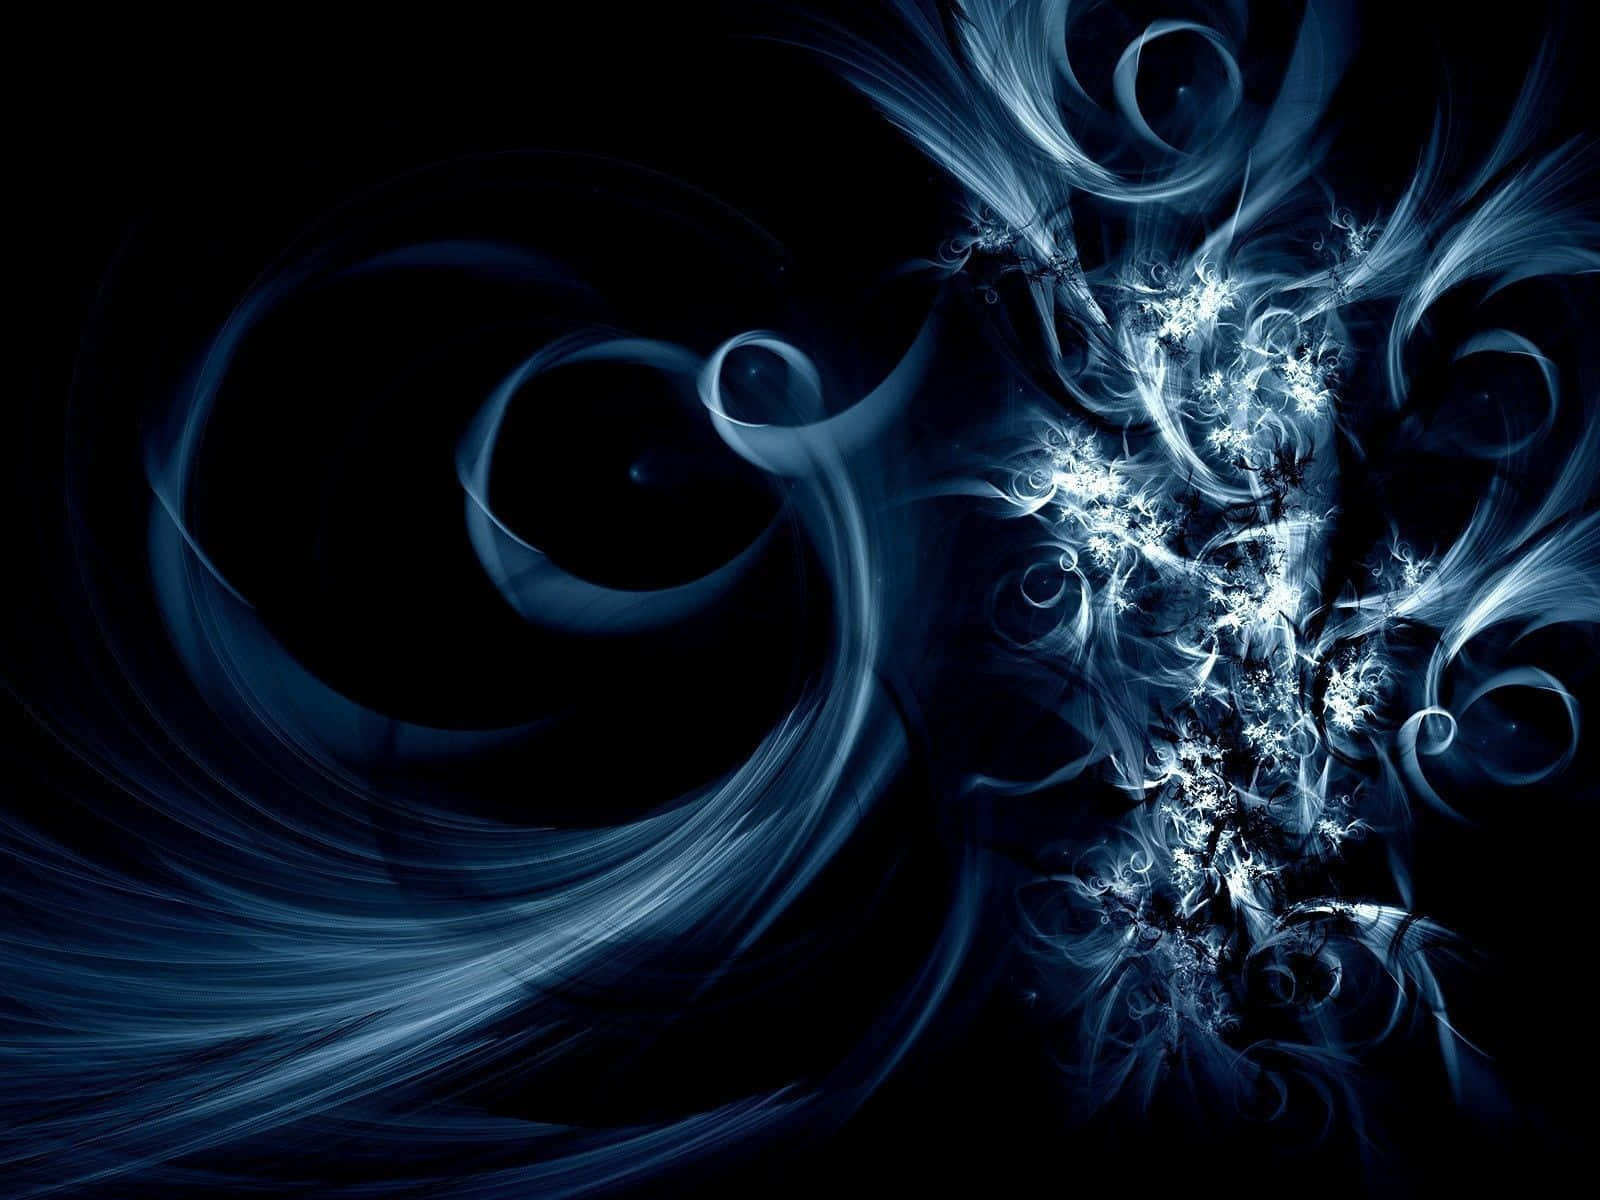 A Blue Abstract Design On A Black Background Wallpaper